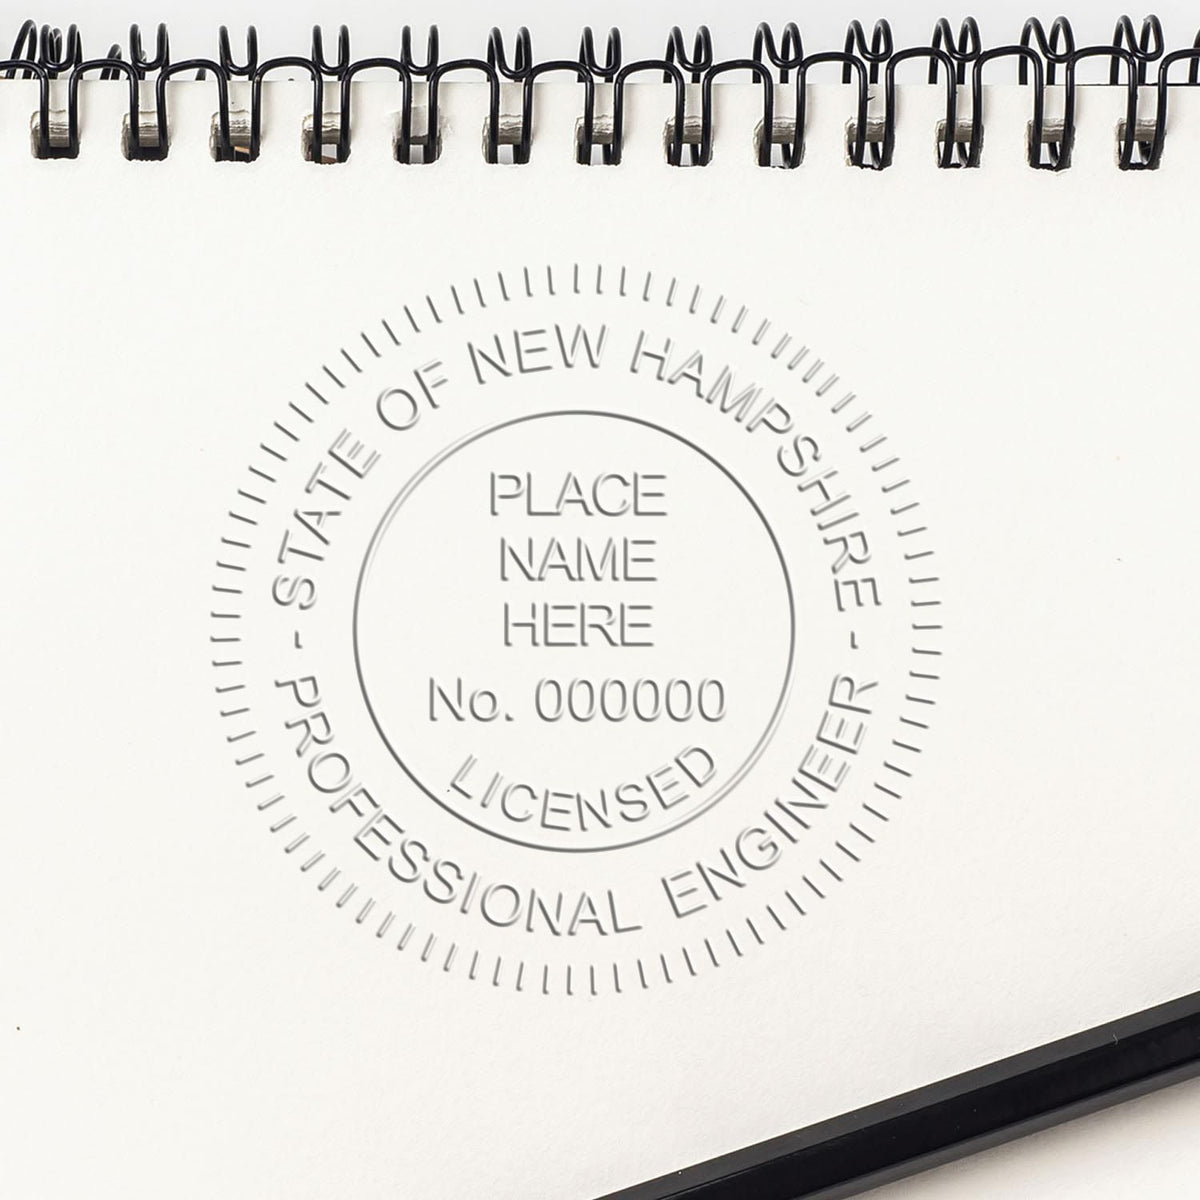 The Gift New Hampshire Engineer Seal stamp impression comes to life with a crisp, detailed image stamped on paper - showcasing true professional quality.